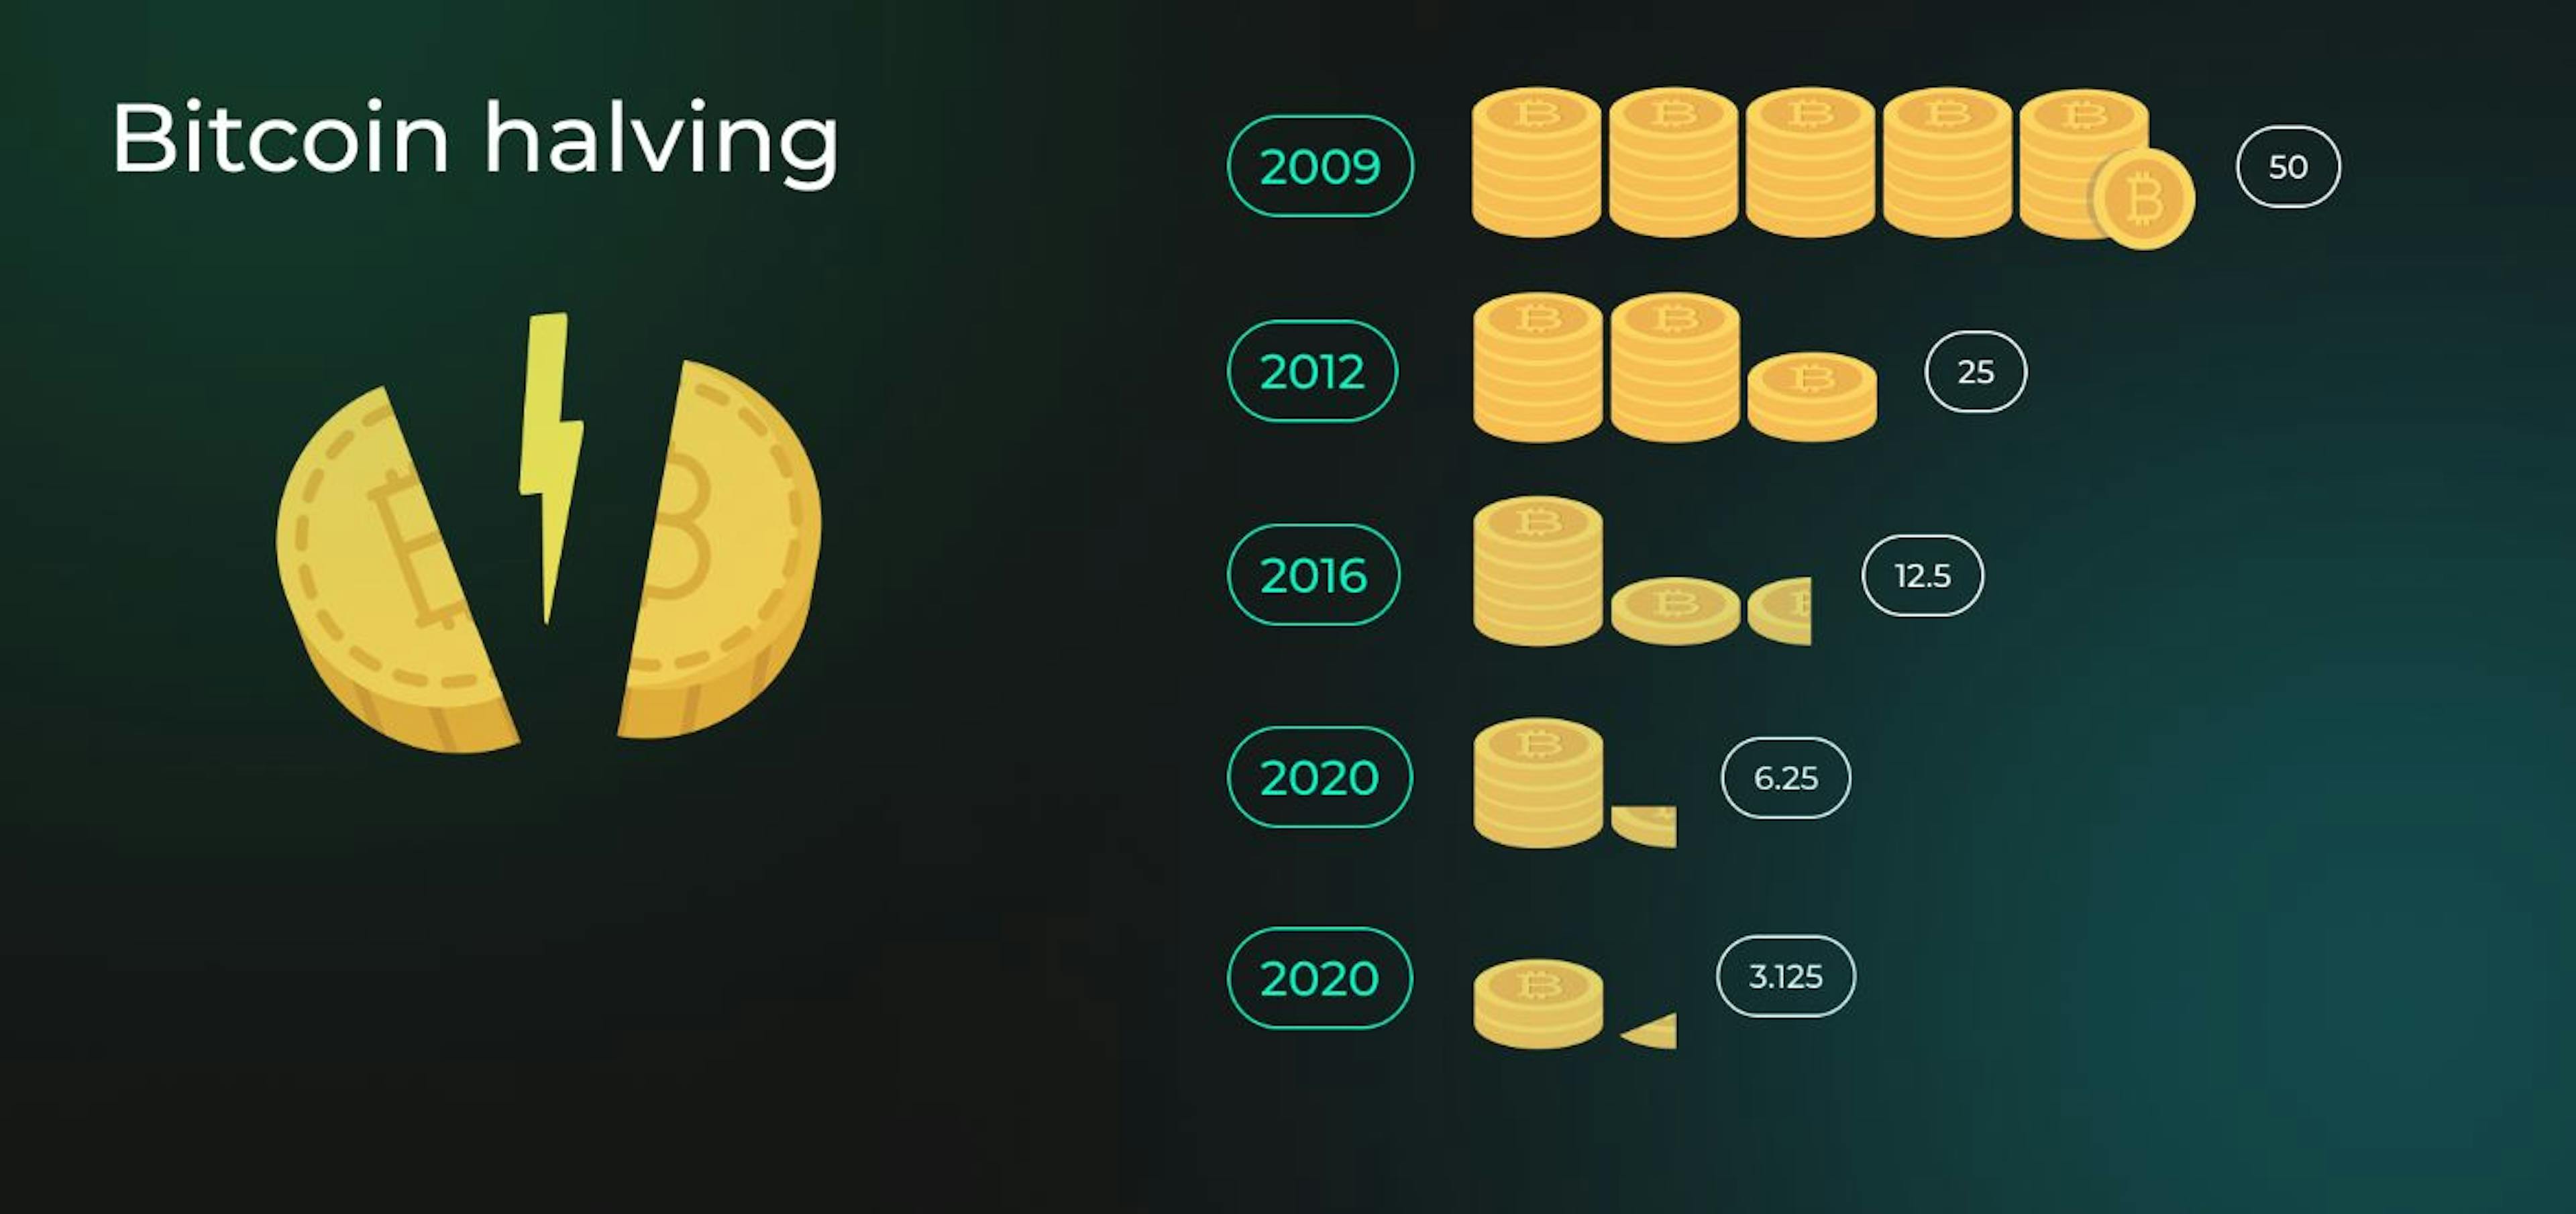 Rewards for block building in bitcoin after halving, from 2009 to 2024